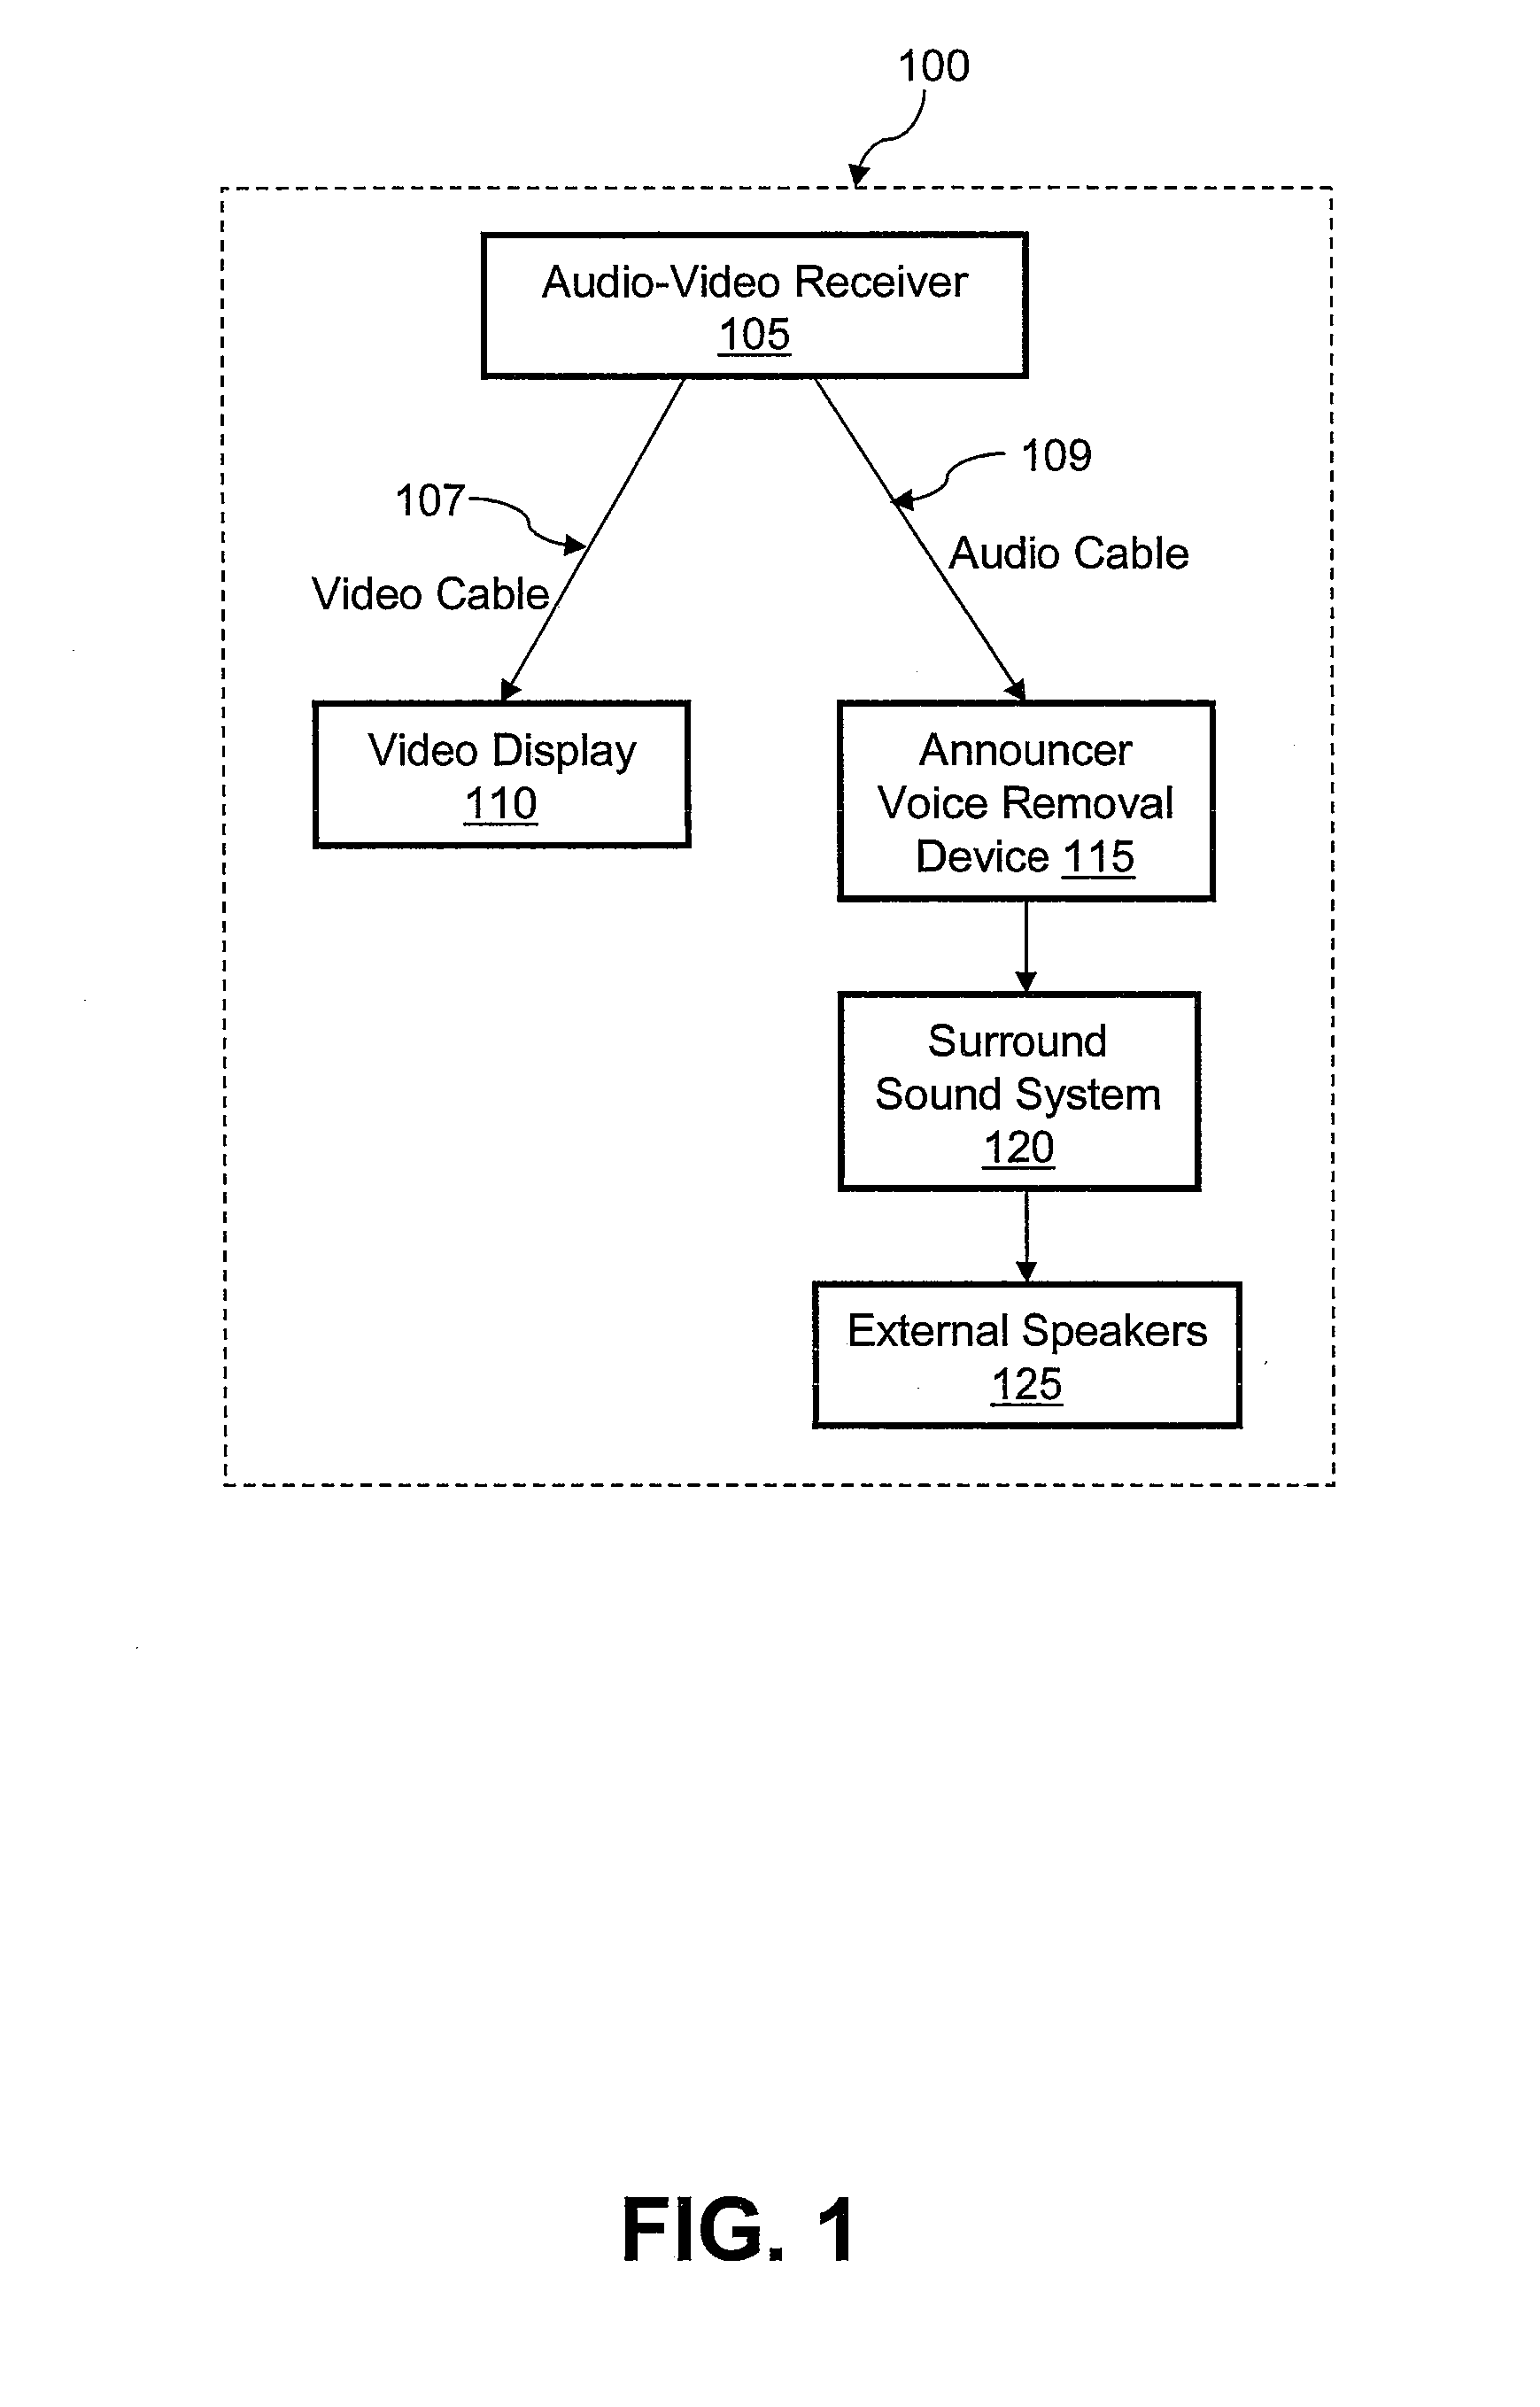 Method and system for automatic announcer voice removal from a televised sporting event